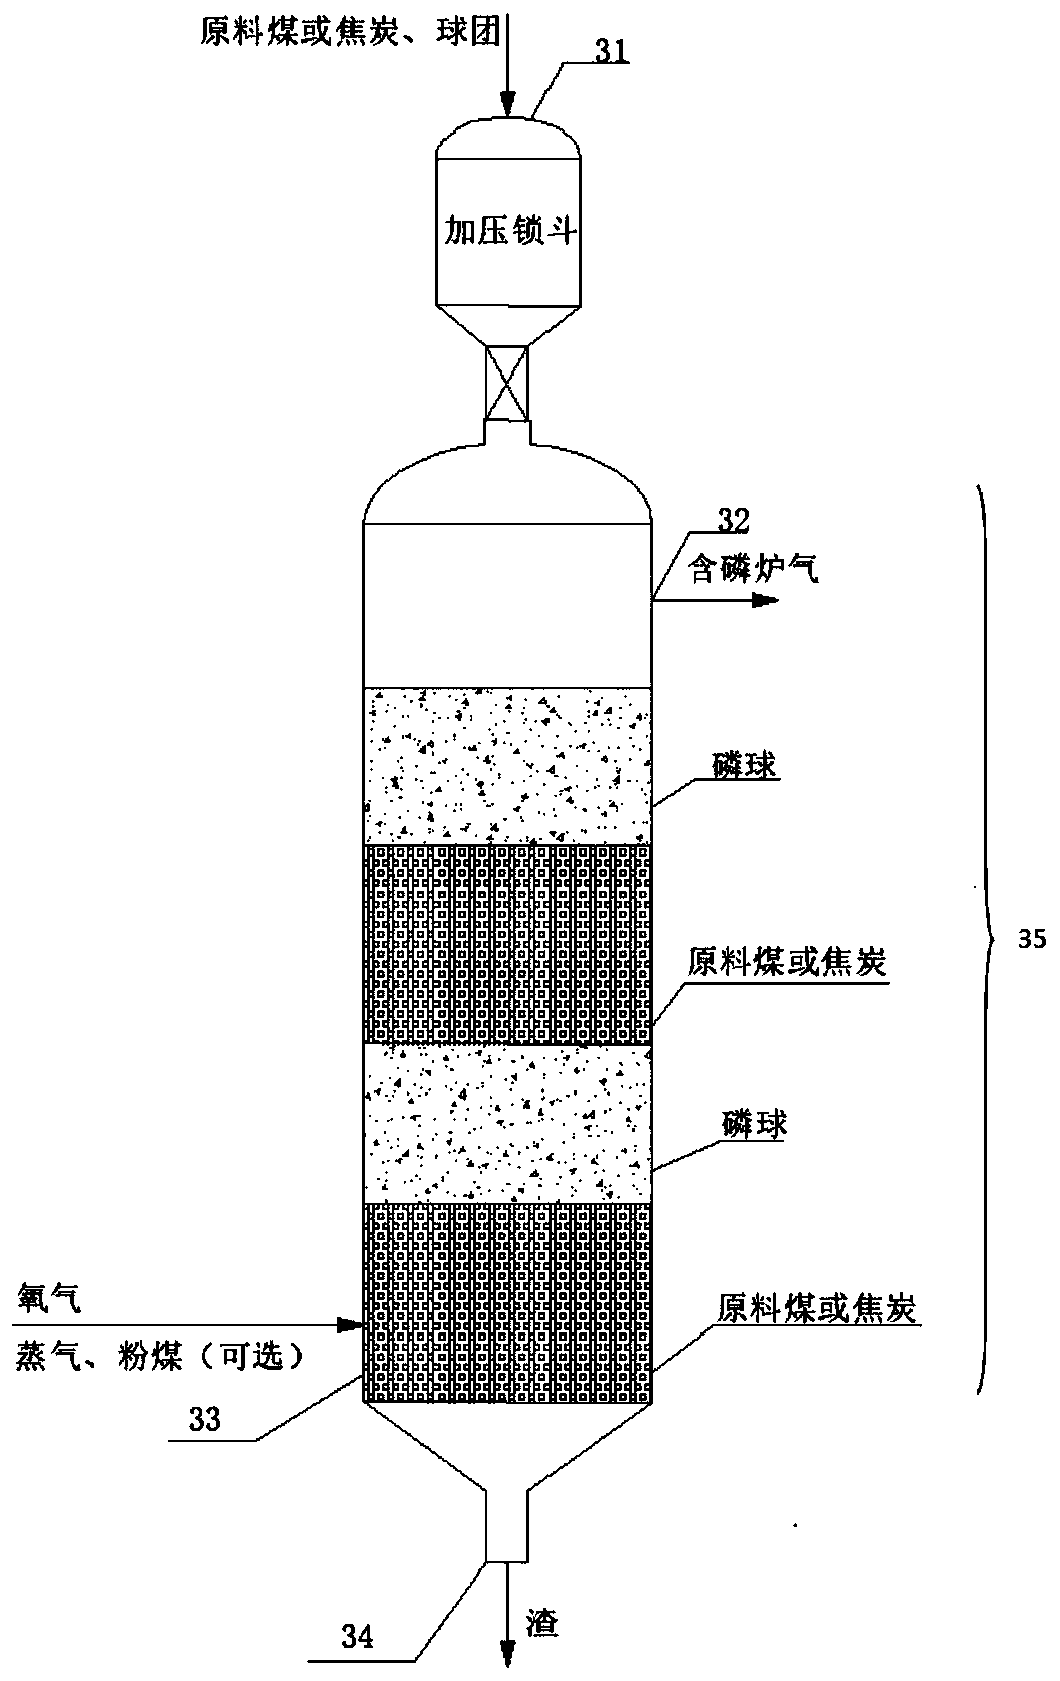 Device and method for co-producing yellow phosphorus and synthesis gas by reducing phosphate ore through pressurized gasification of phosphorus coal